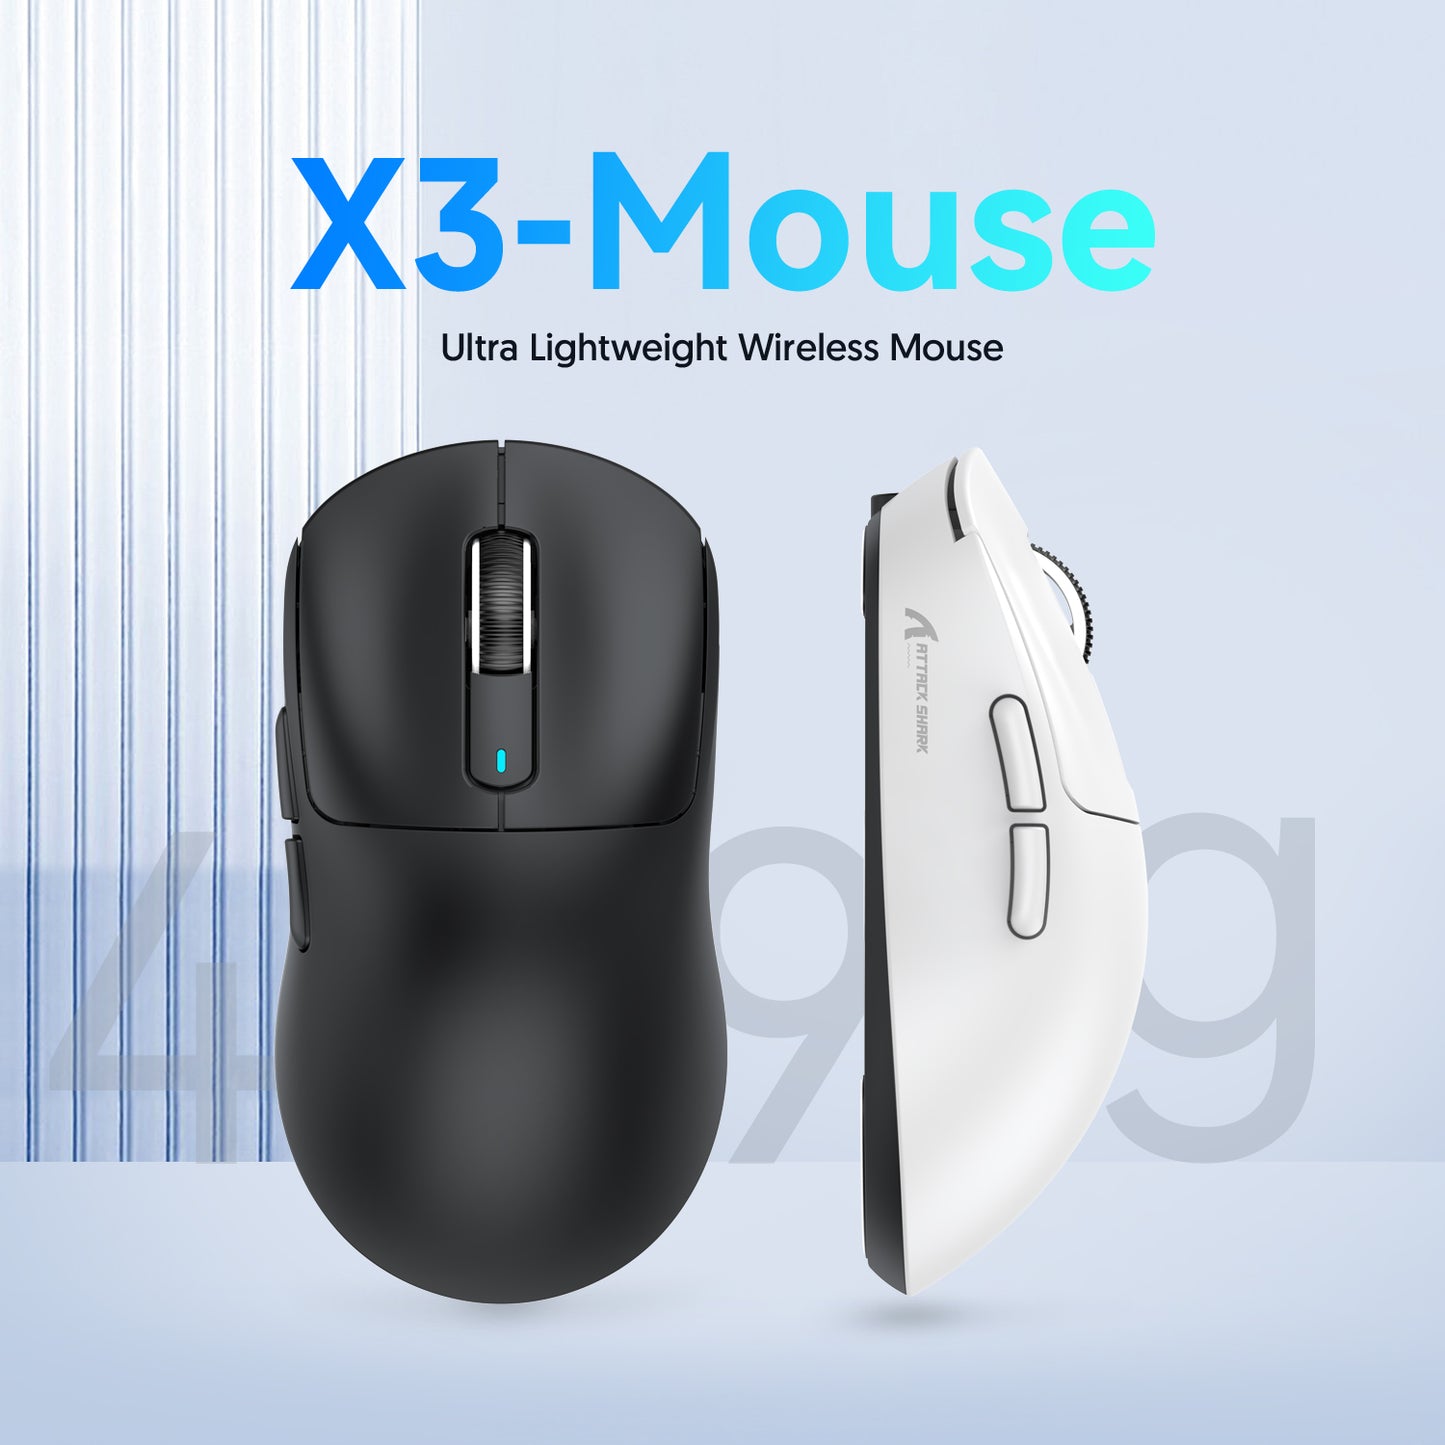 Attack Shark X3 Wireless Gaming Mouse